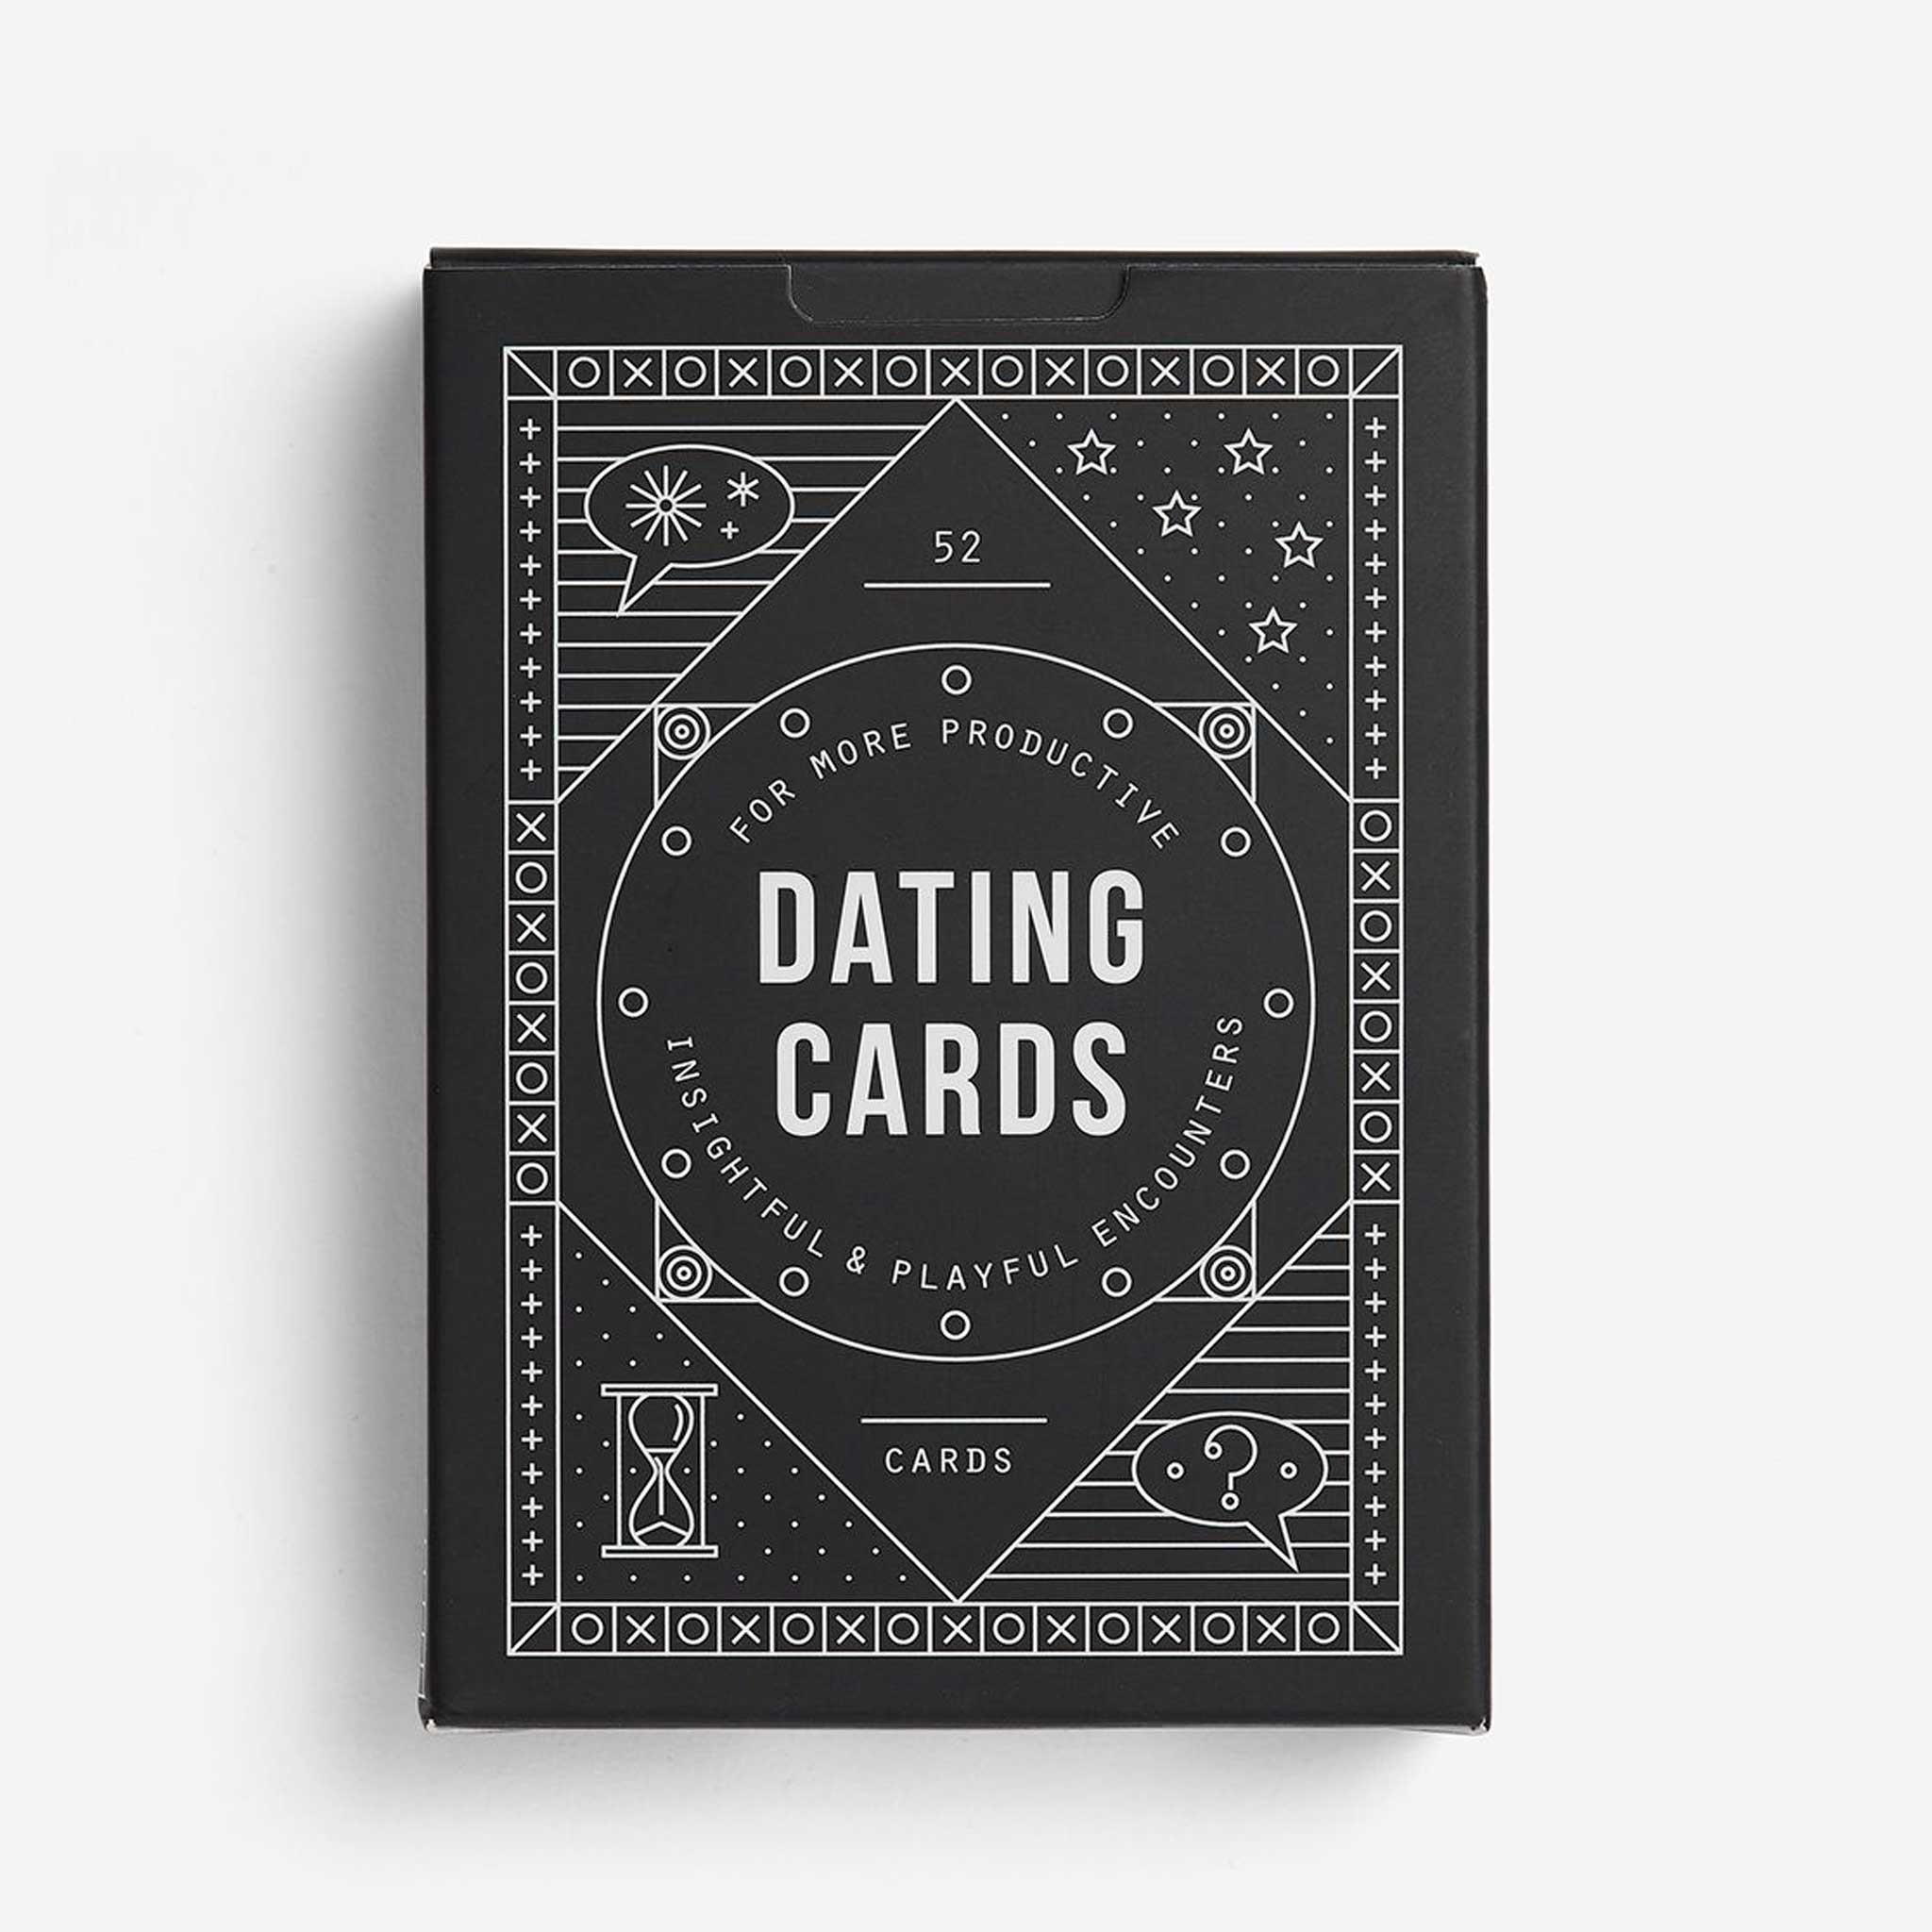 DATING CARDS | CARD GAME to spark insightful and playful ENCOUNTERS | English Edition | The School of Life